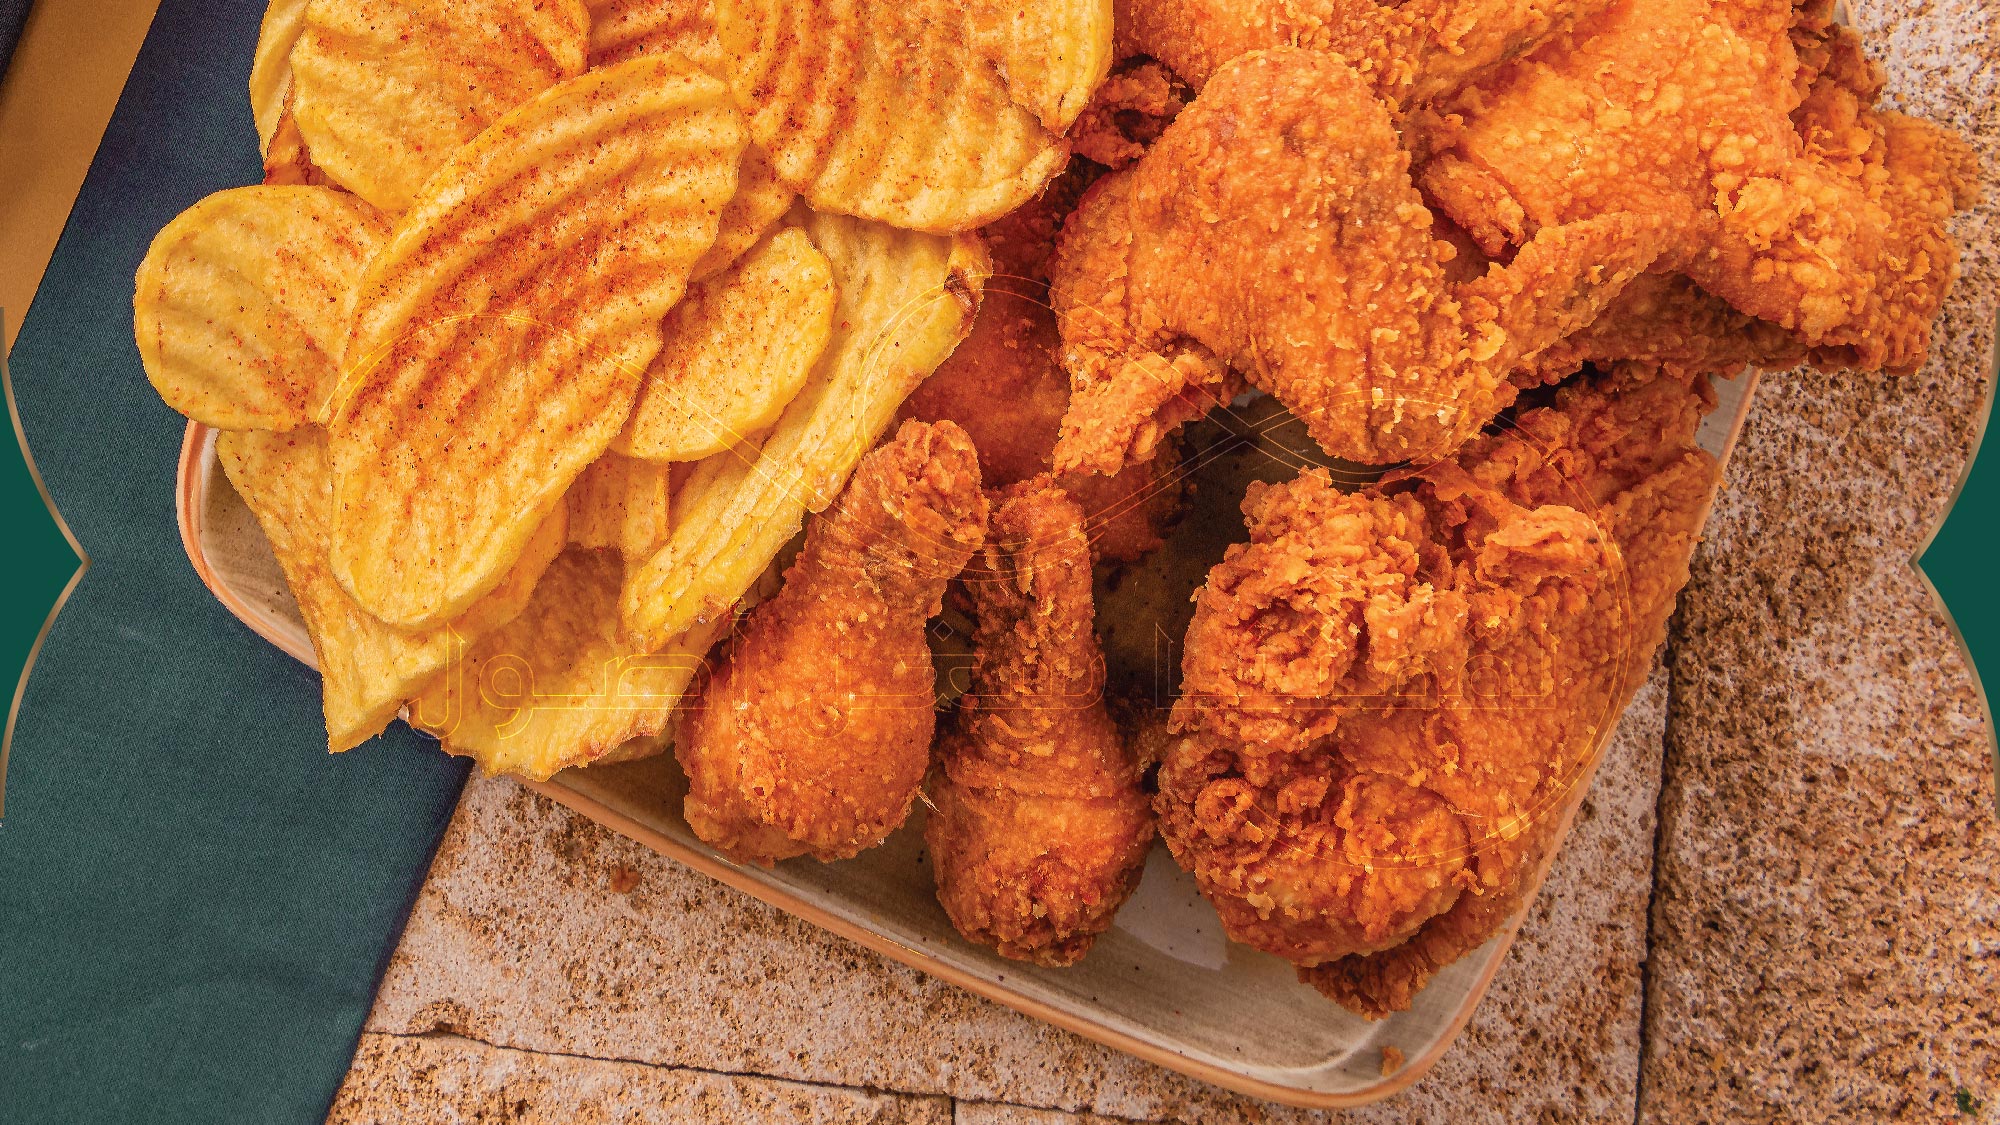 Conclusion: Finding the Best Broasted Chicken in Sharjah ​